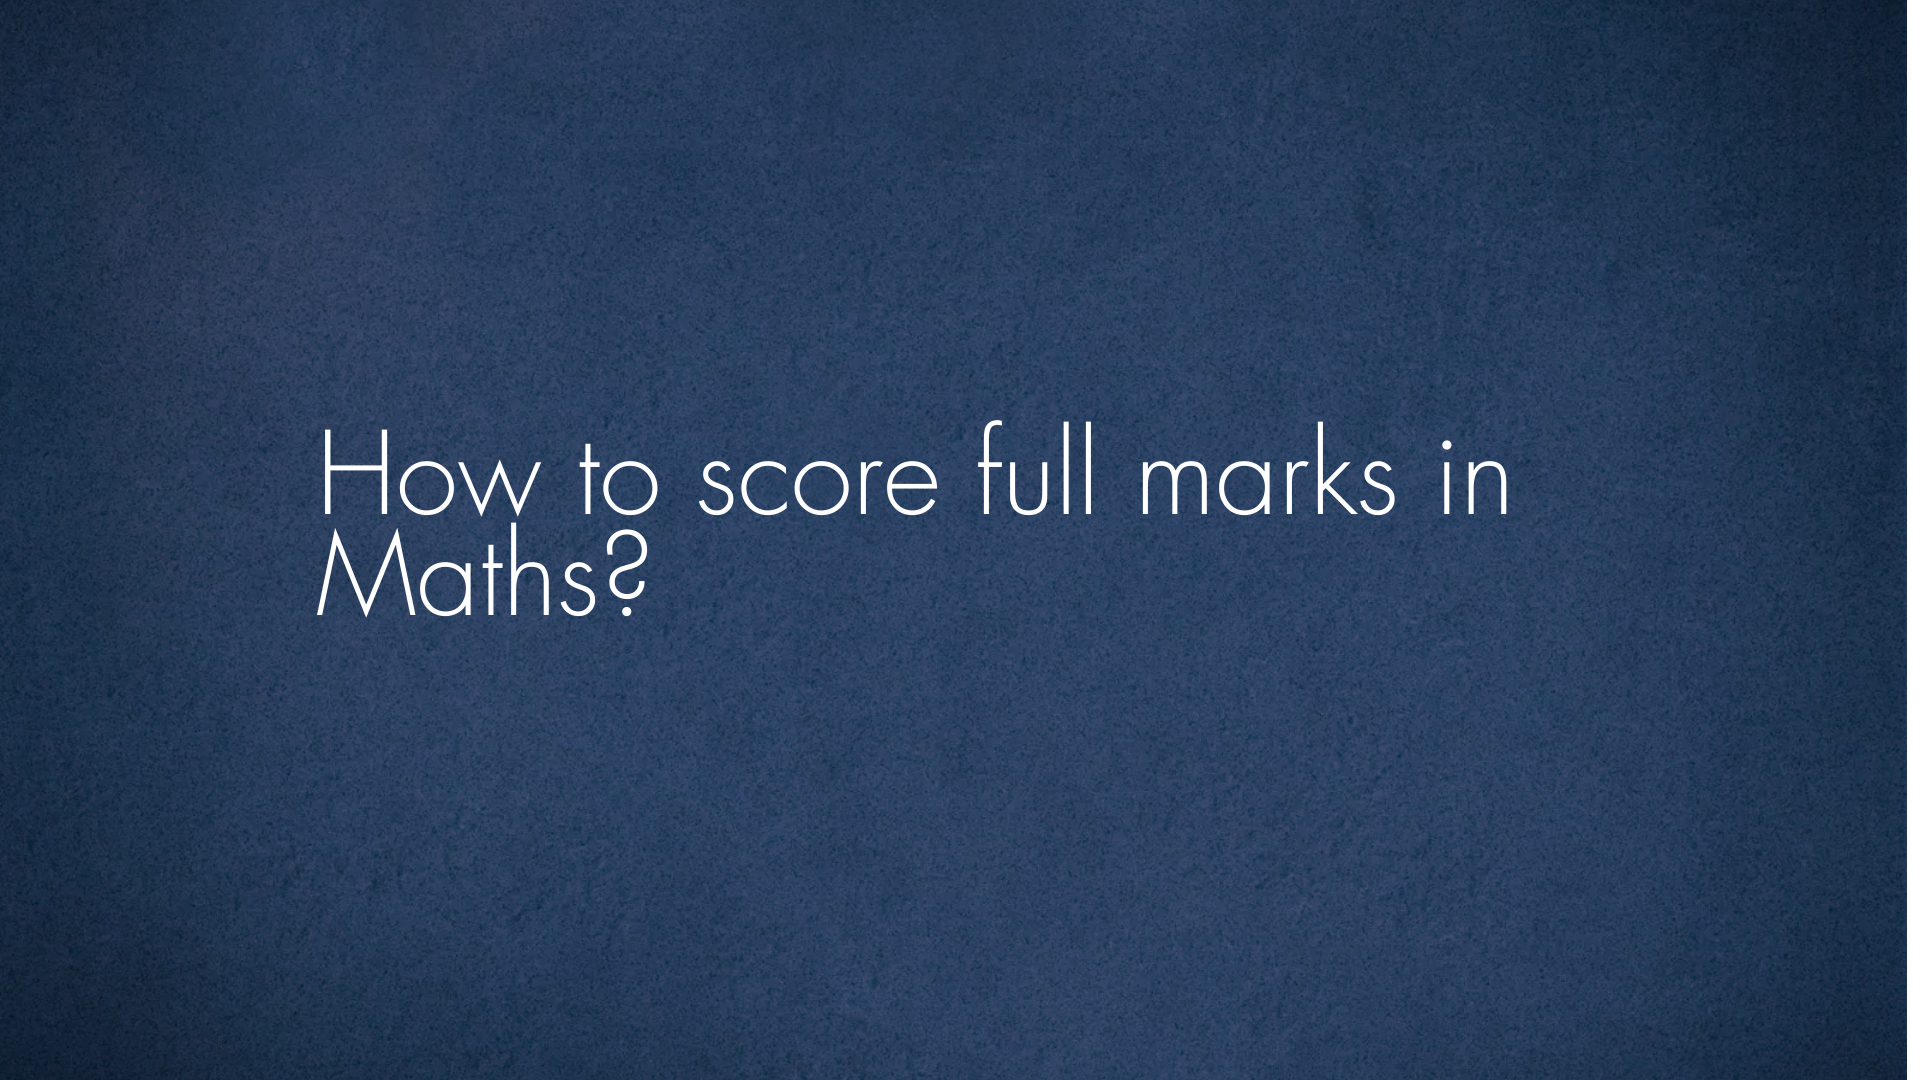 How to score full marks in Maths?